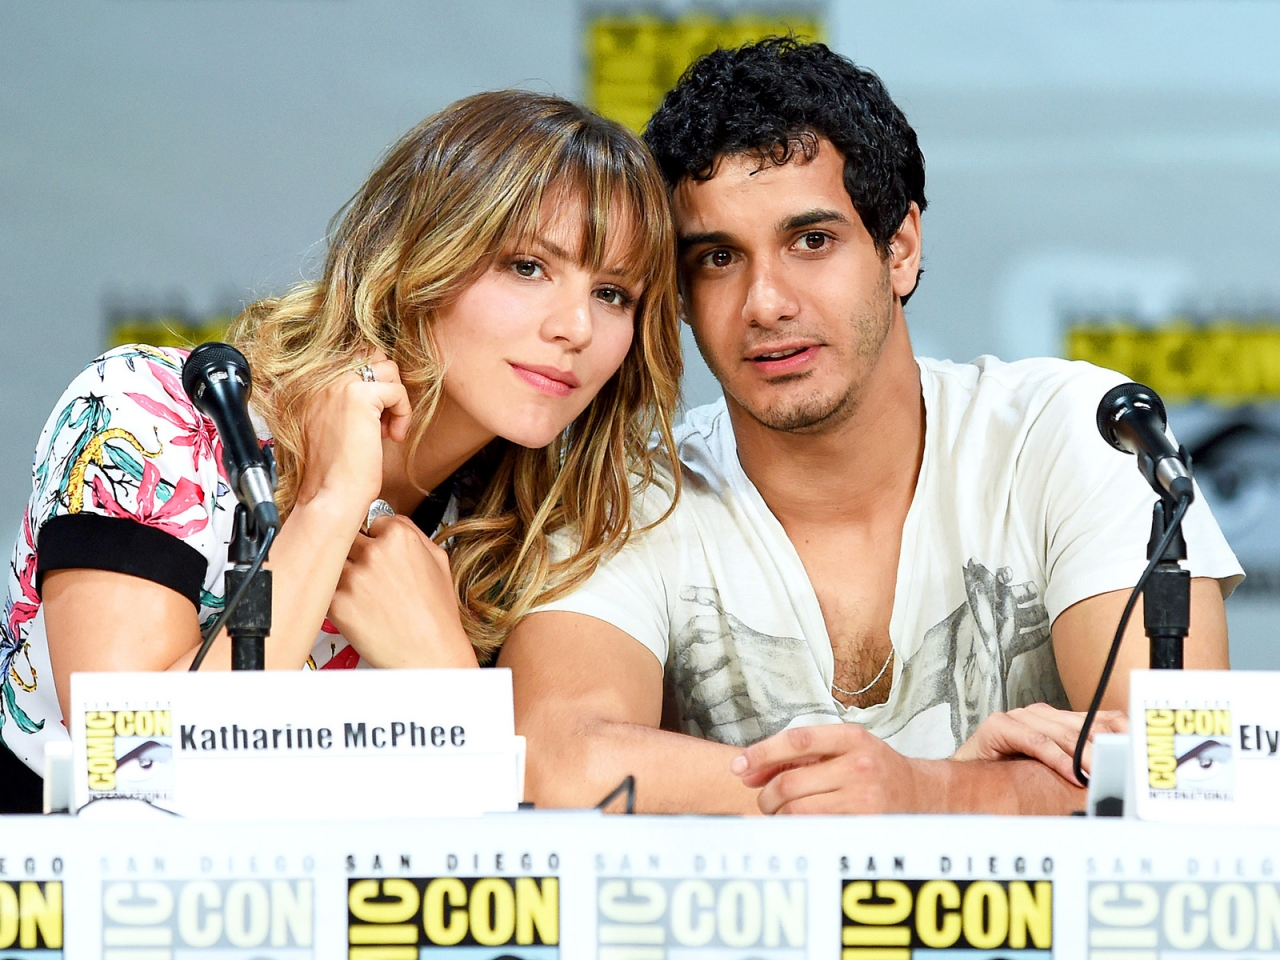 Katharine McPhee and Elyes Gabel for 1280 x 960 resolution